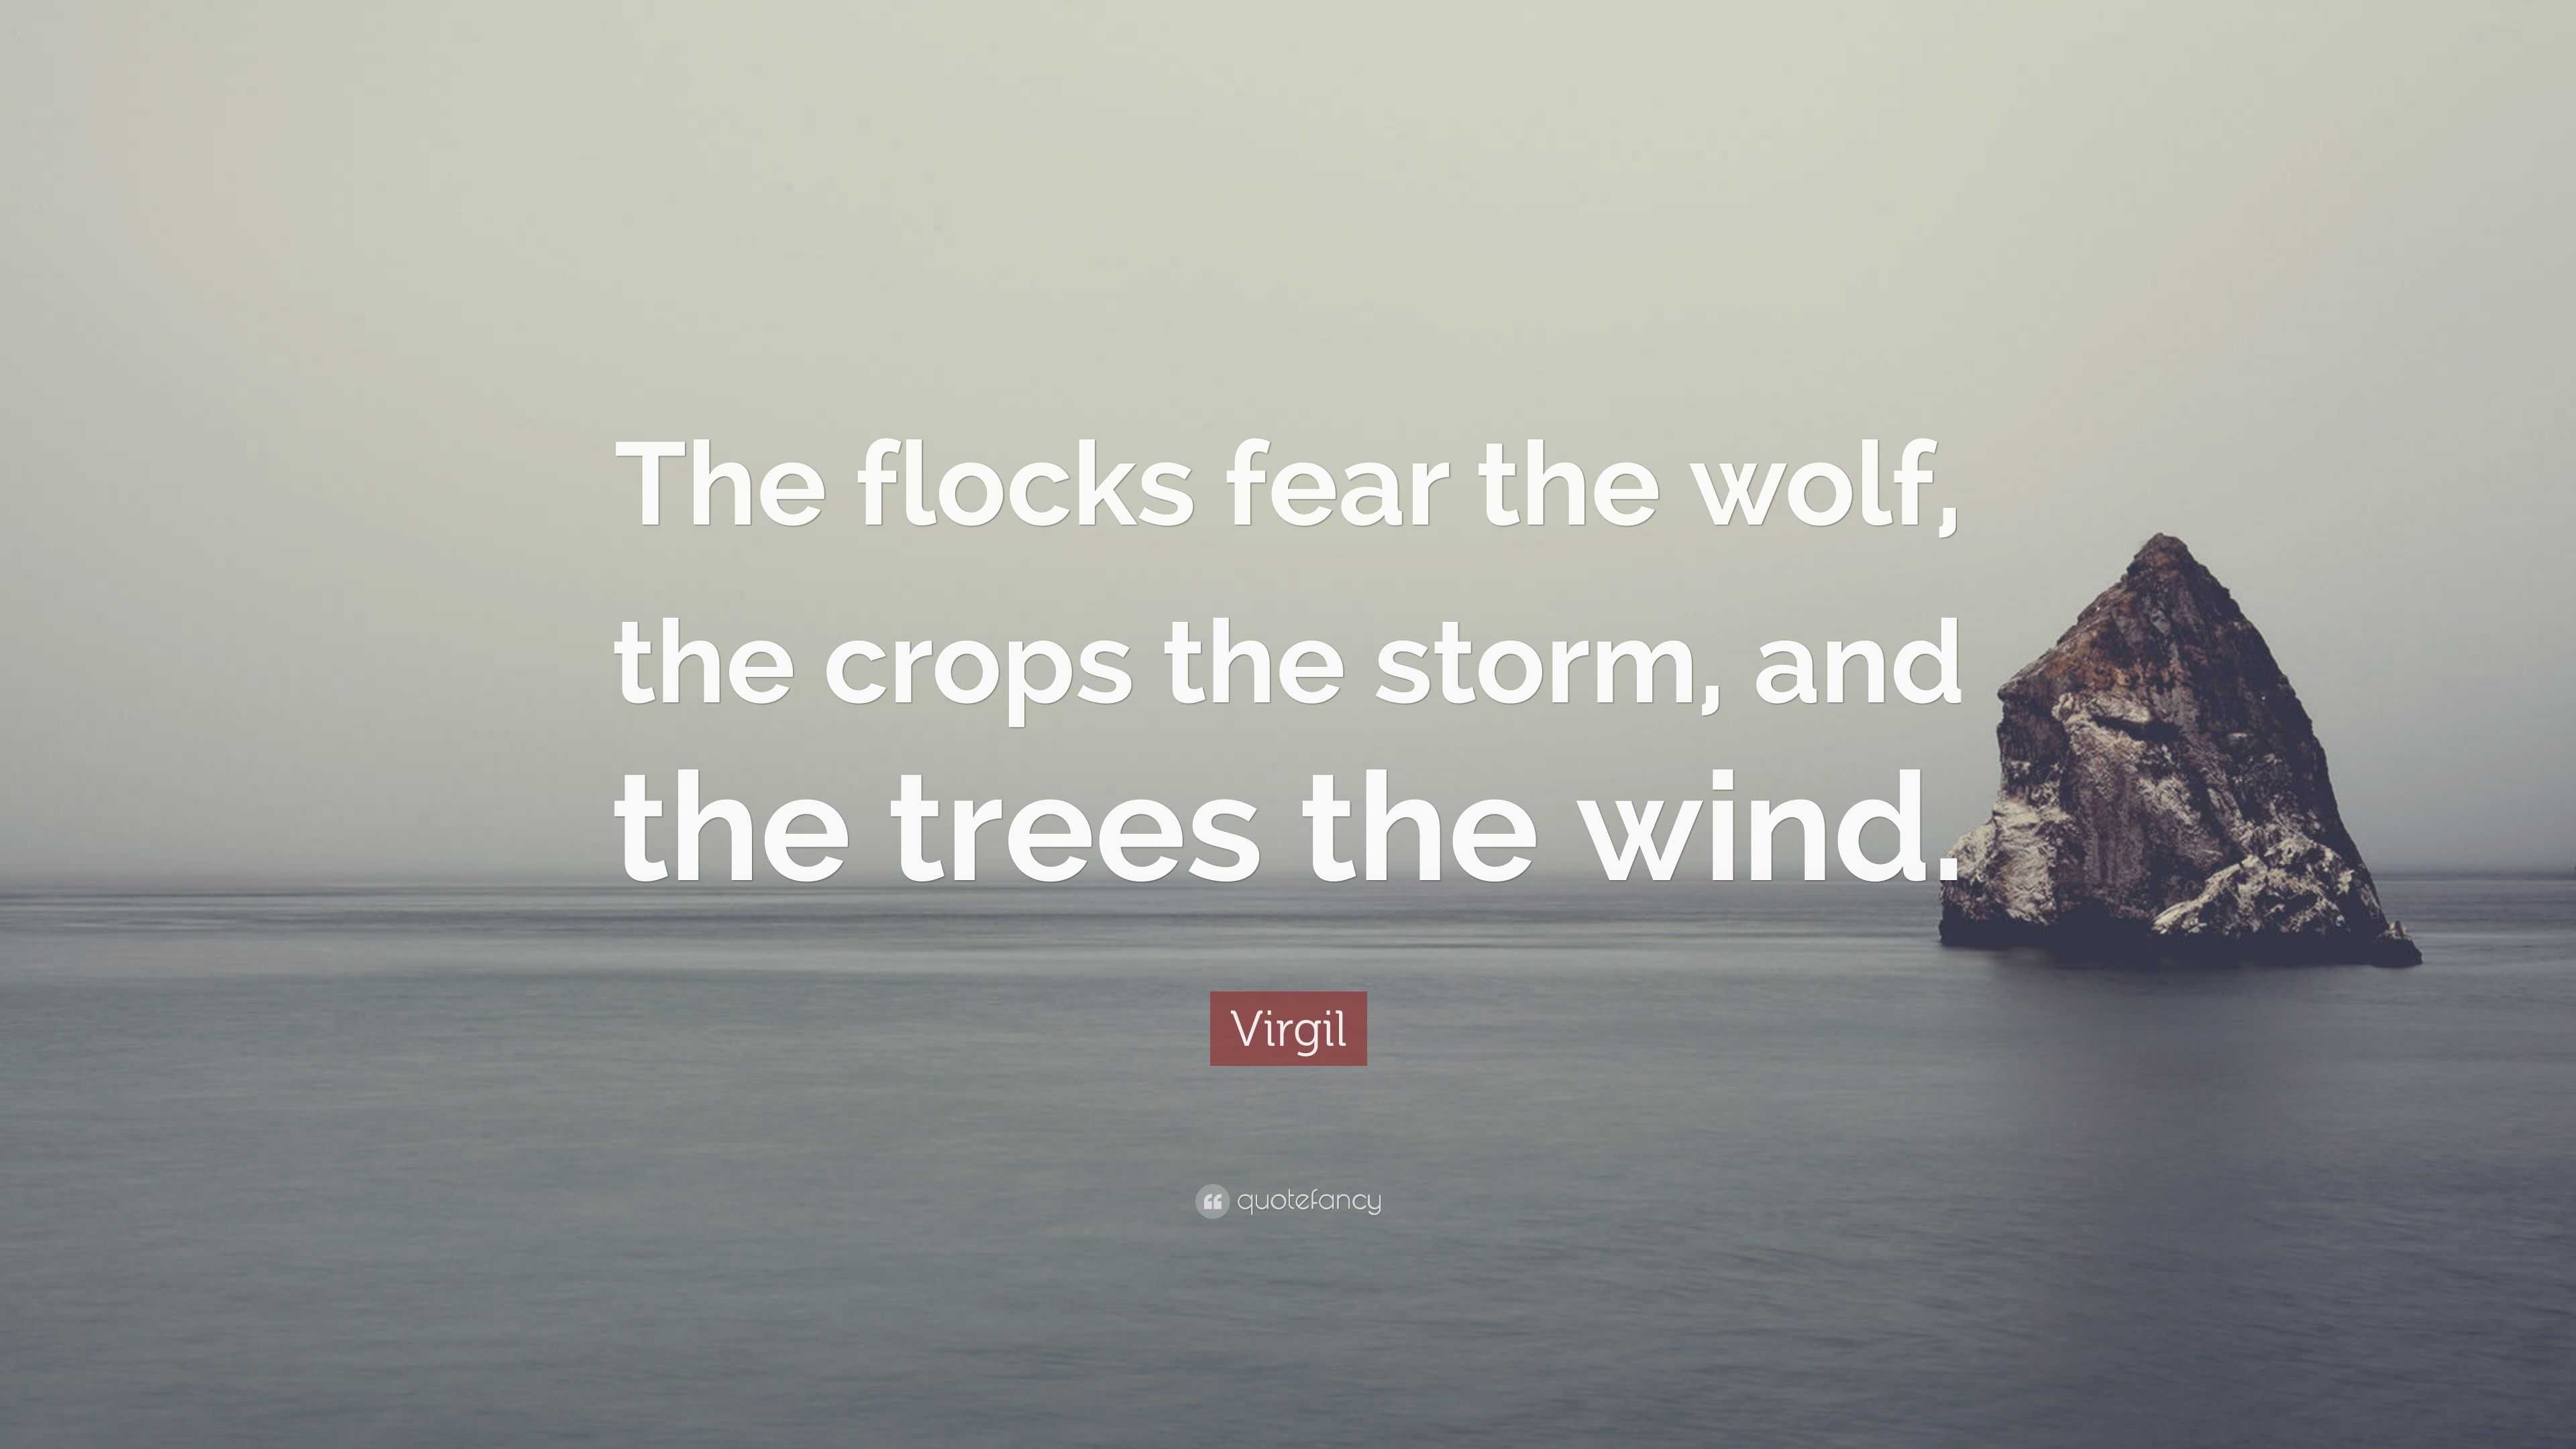 Virgil Quote: “The flocks fear the wolf